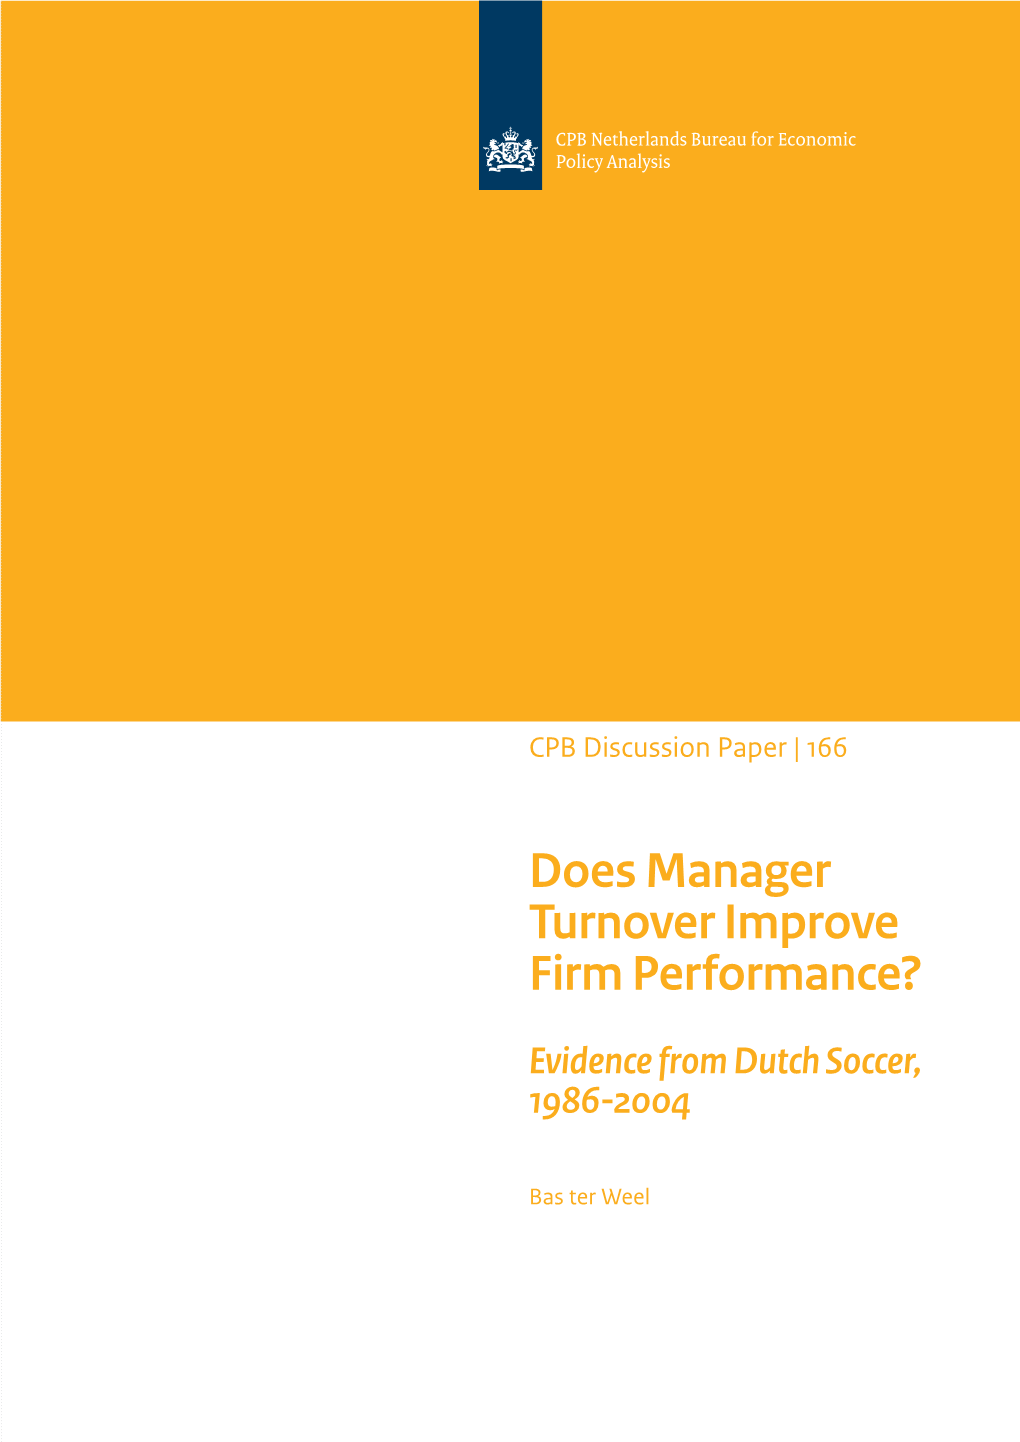 Manager Turnover and Firm Performance